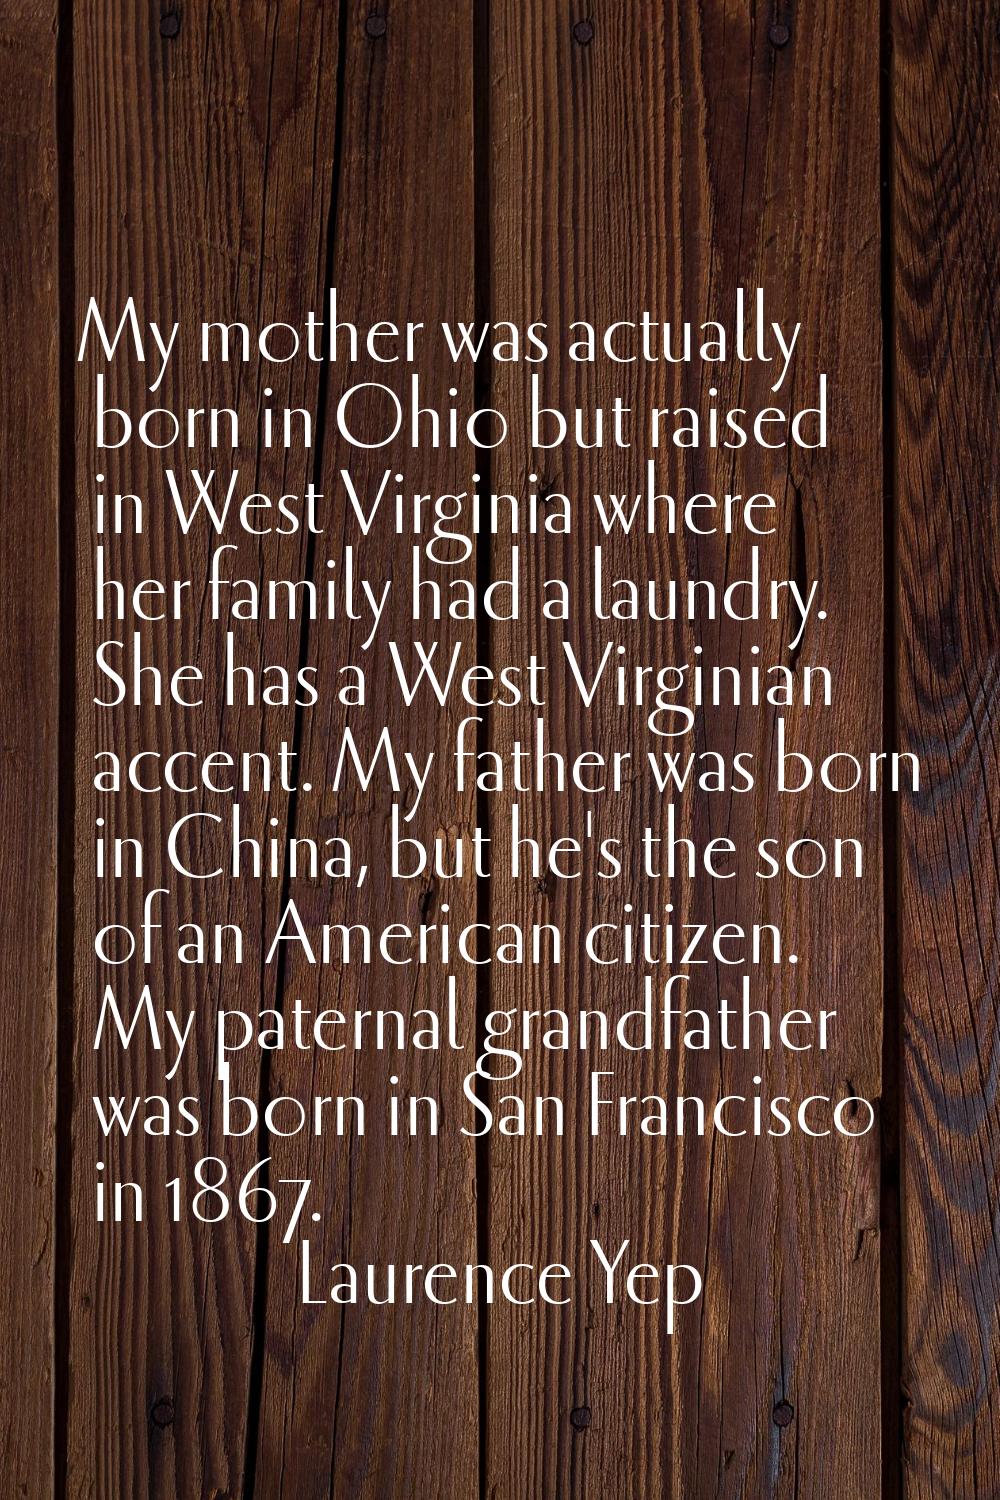 My mother was actually born in Ohio but raised in West Virginia where her family had a laundry. She